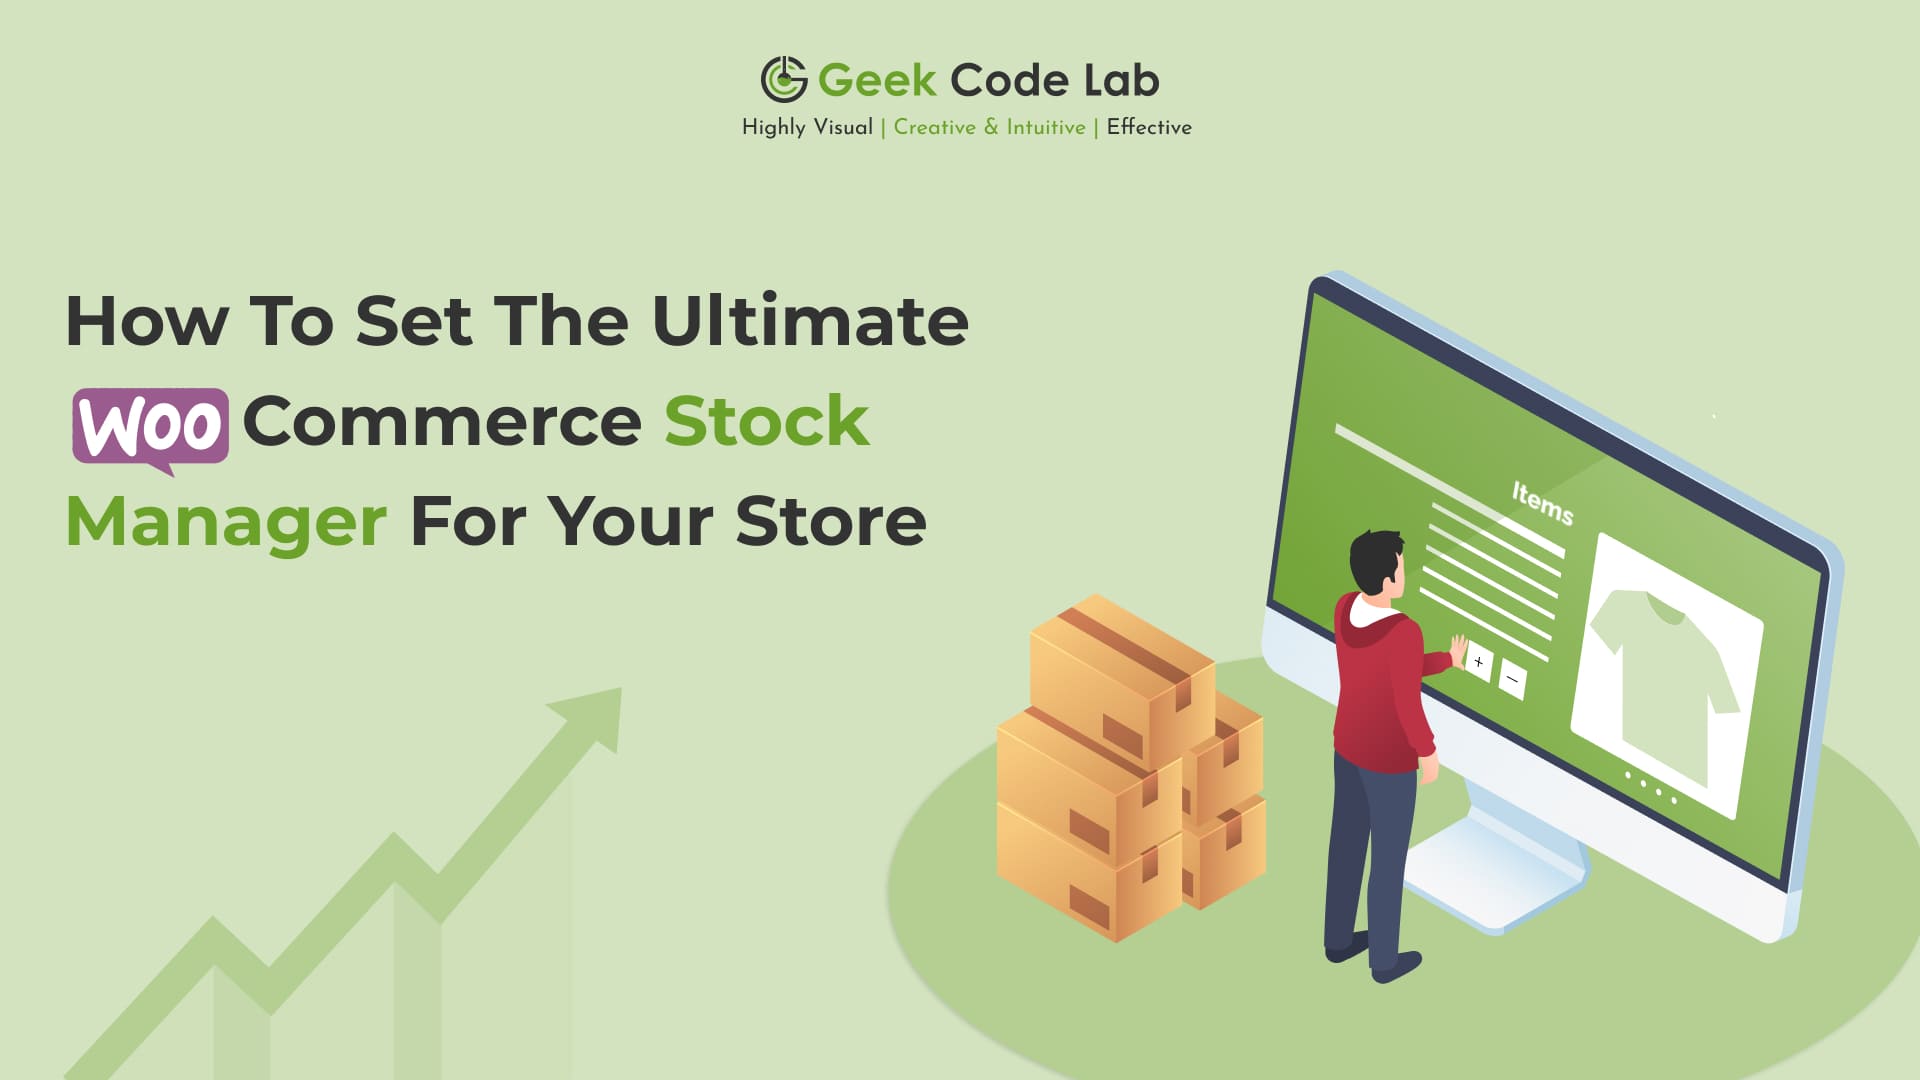 How to set the ultimate WooCommerce Stock Manager for your store